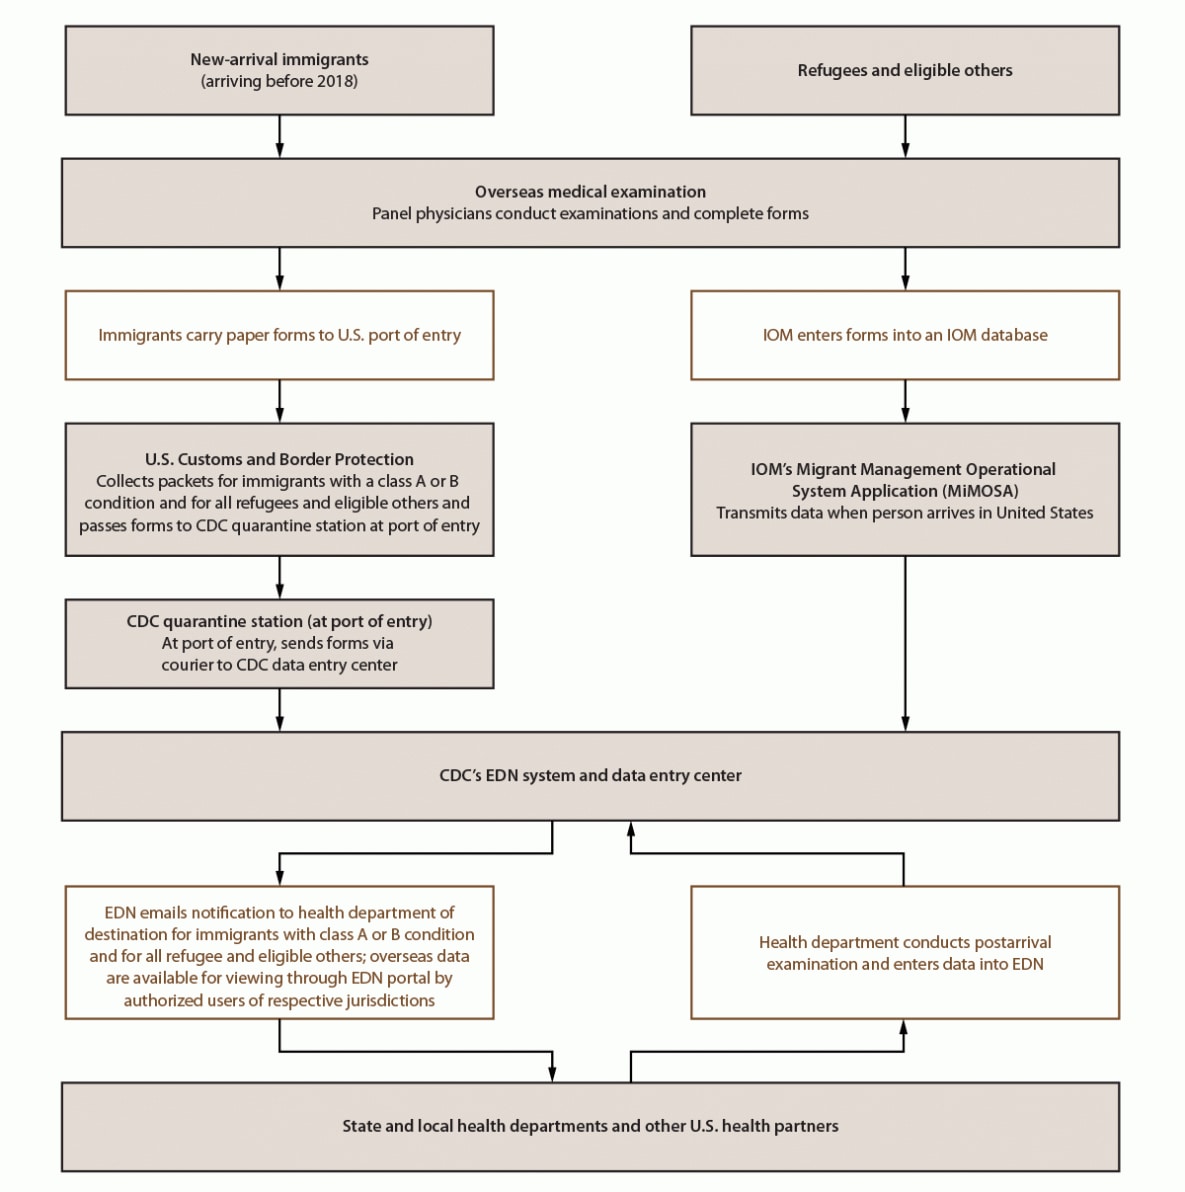 This figure is a flow chart showing the Electronic Disease Notification system process for new-arrival immigrants, refugees, and eligible others.